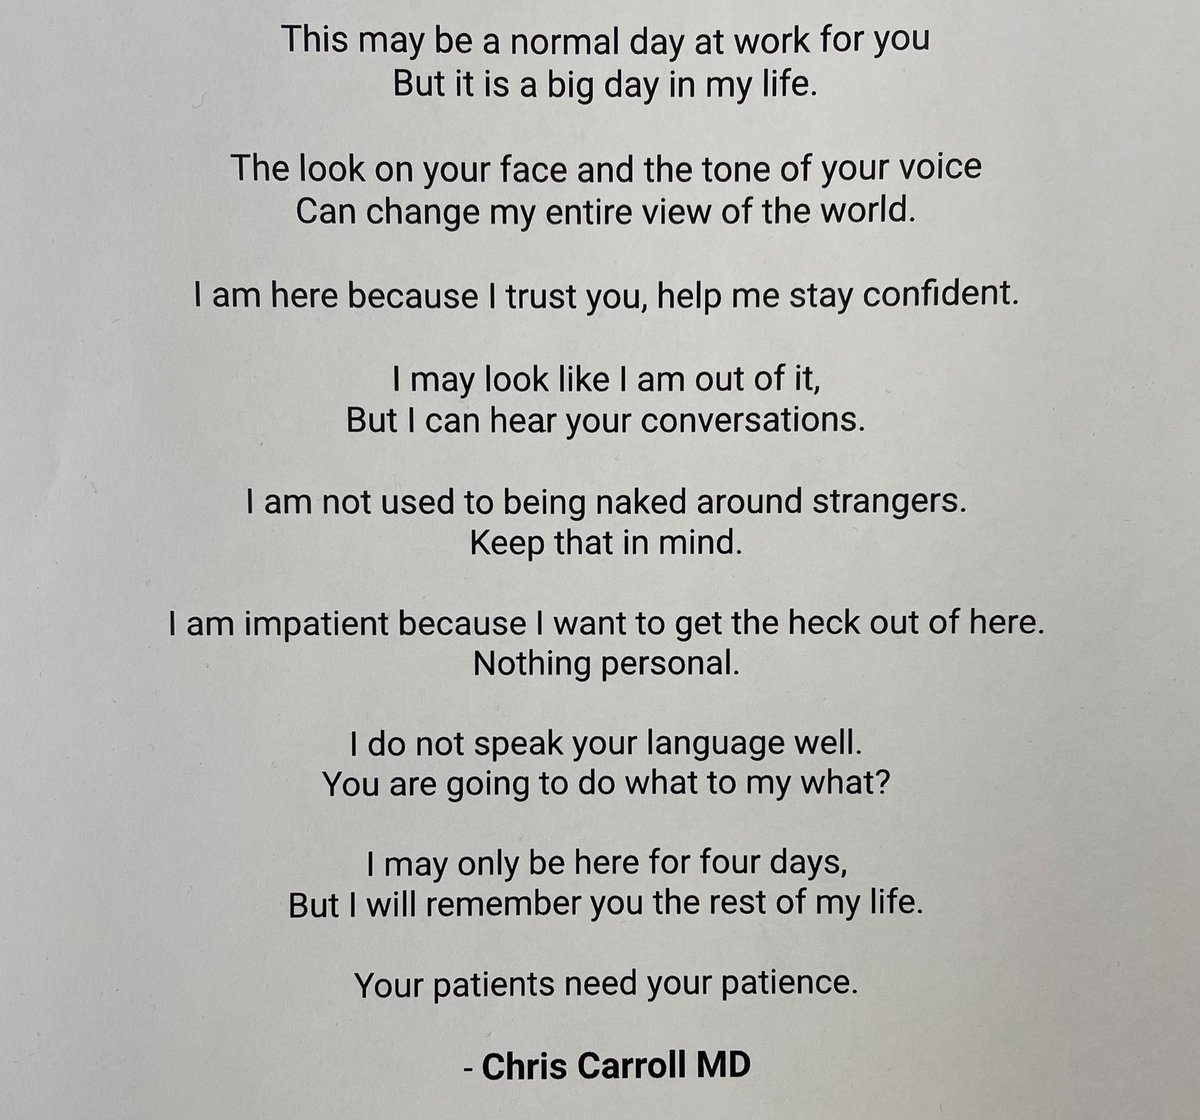 Seen in the hospital: Perception from a patient.